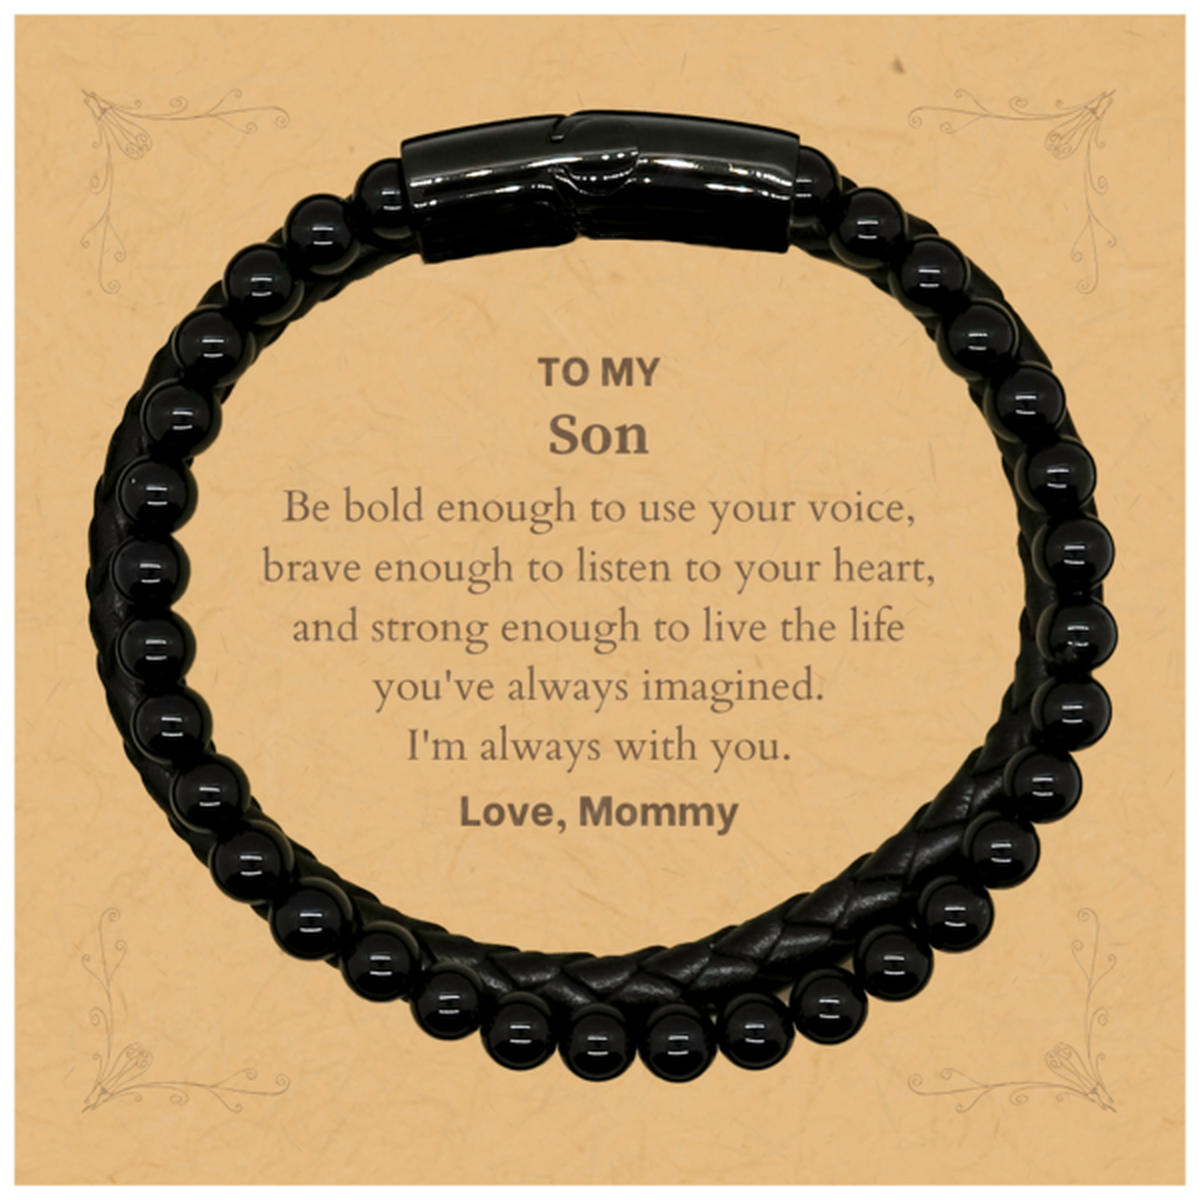 Keepsake Son Stone Leather Bracelets Gift Idea Graduation Christmas Birthday Son from Mommy, Son Be bold enough to use your voice, brave enough to listen to your heart. Love, Mommy